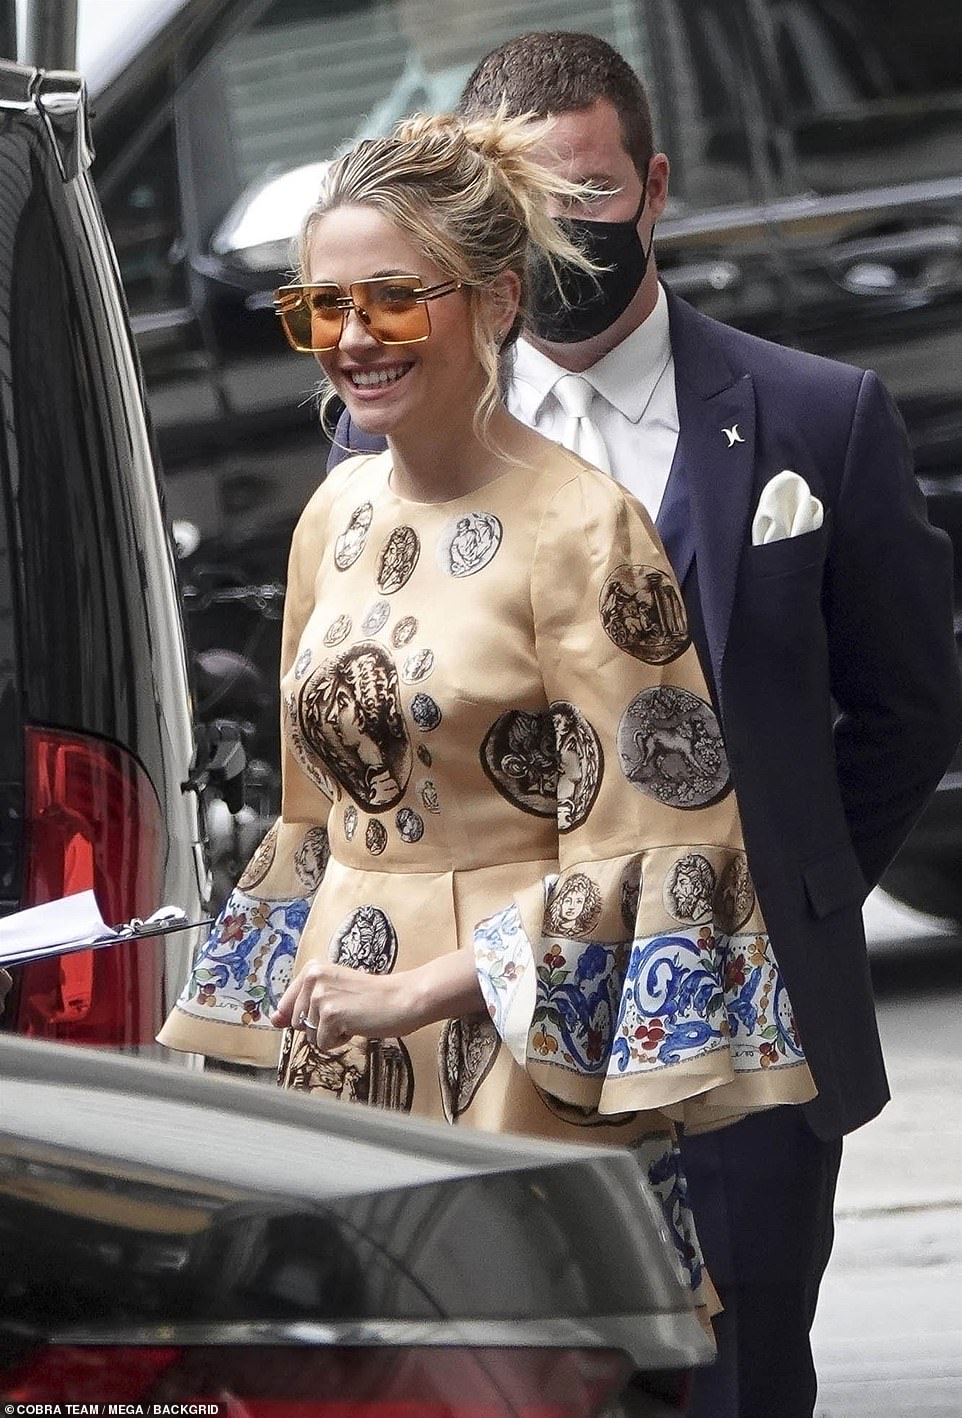 La dolce vita! Pixie looked perfectly dressed for the Italian summer in a silk number and 1970s style glasses for the second day of celebrations